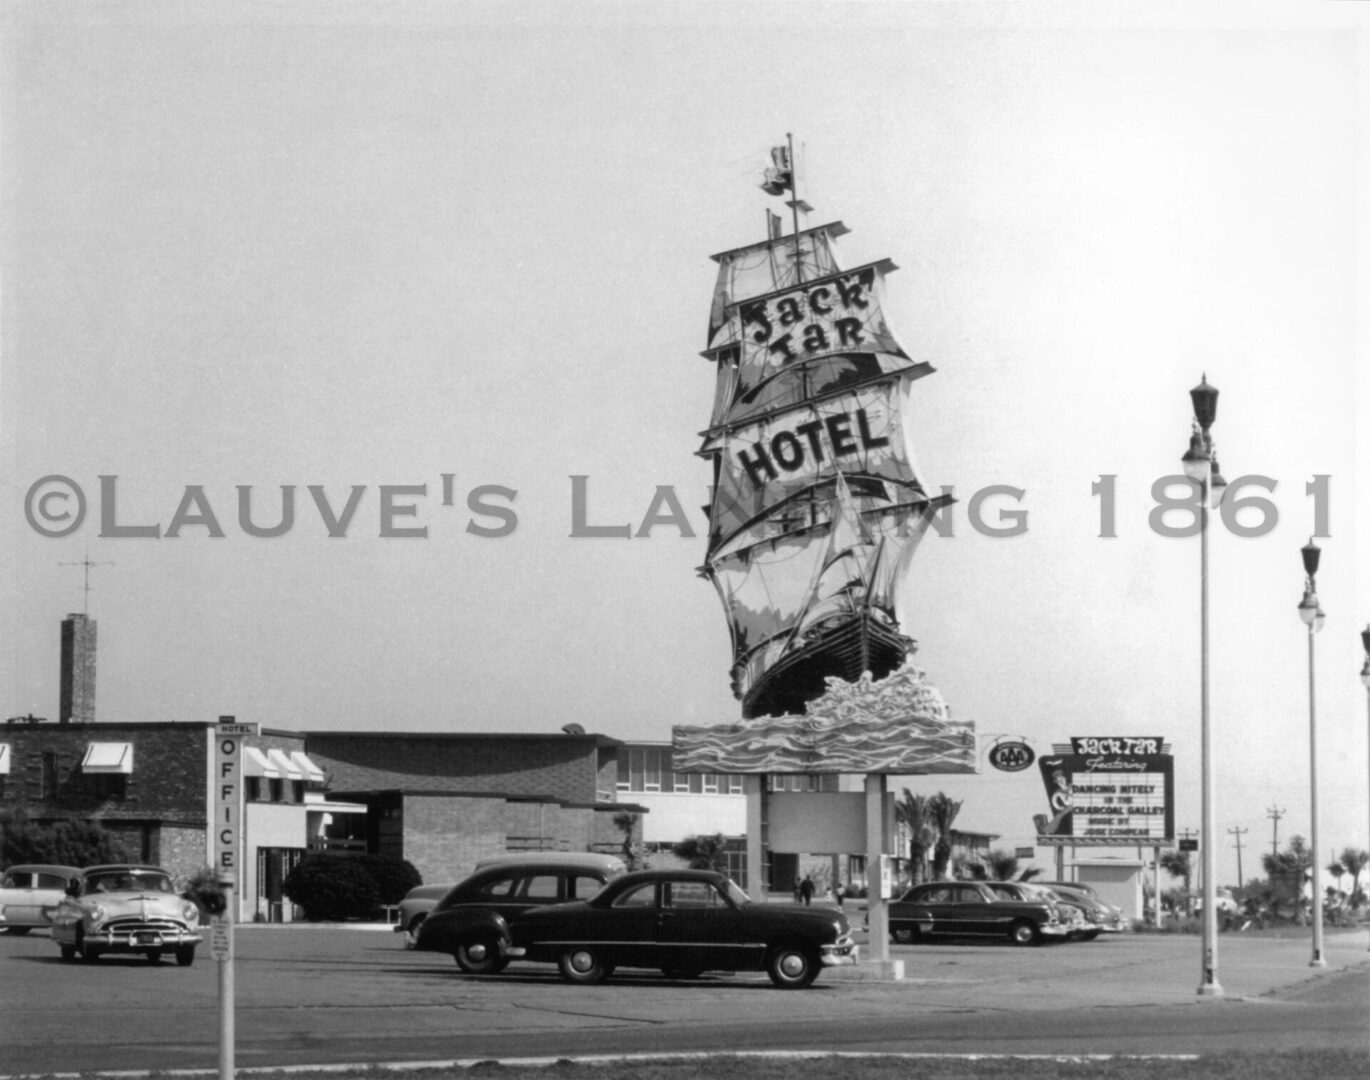 A black and white photo of a sign for lauve's motel.